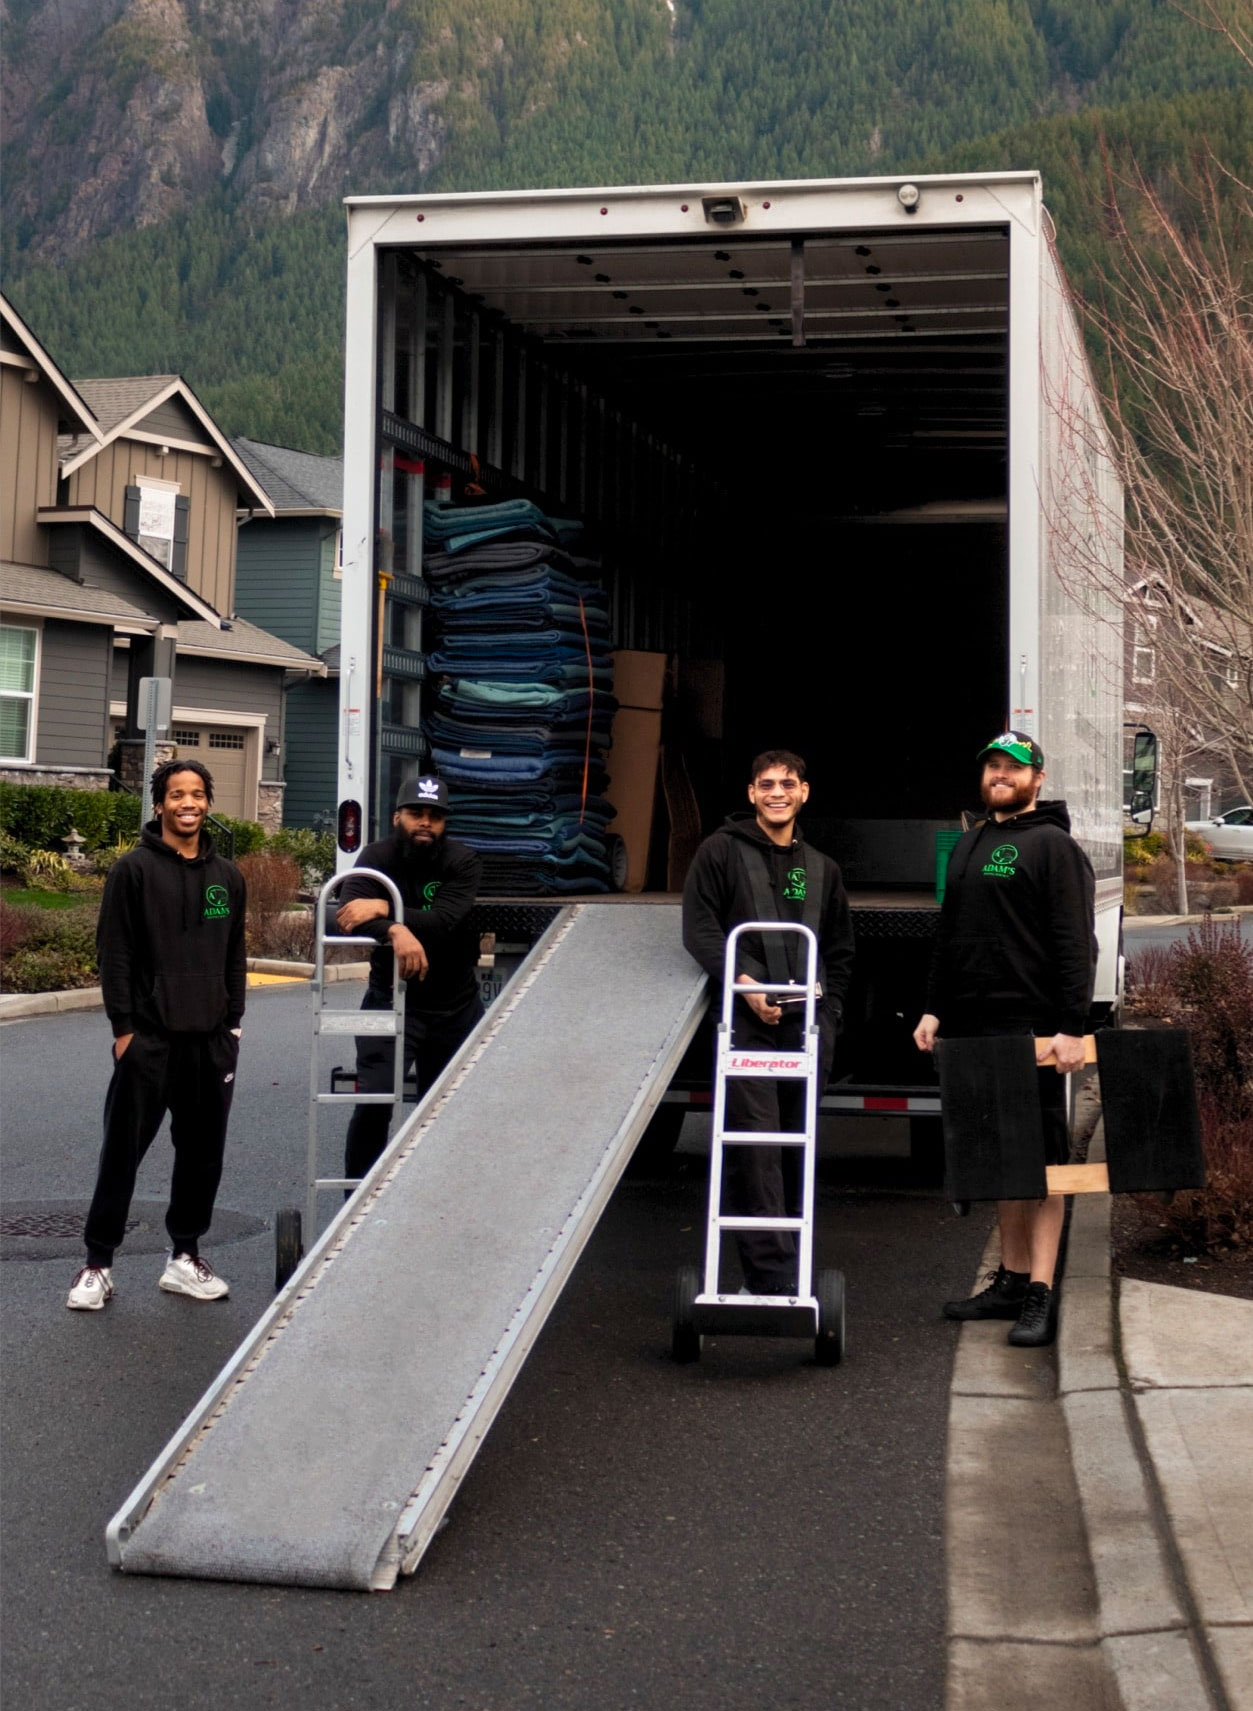 Movers in Seattle Ready for a Residential Move | Adams Moving Service